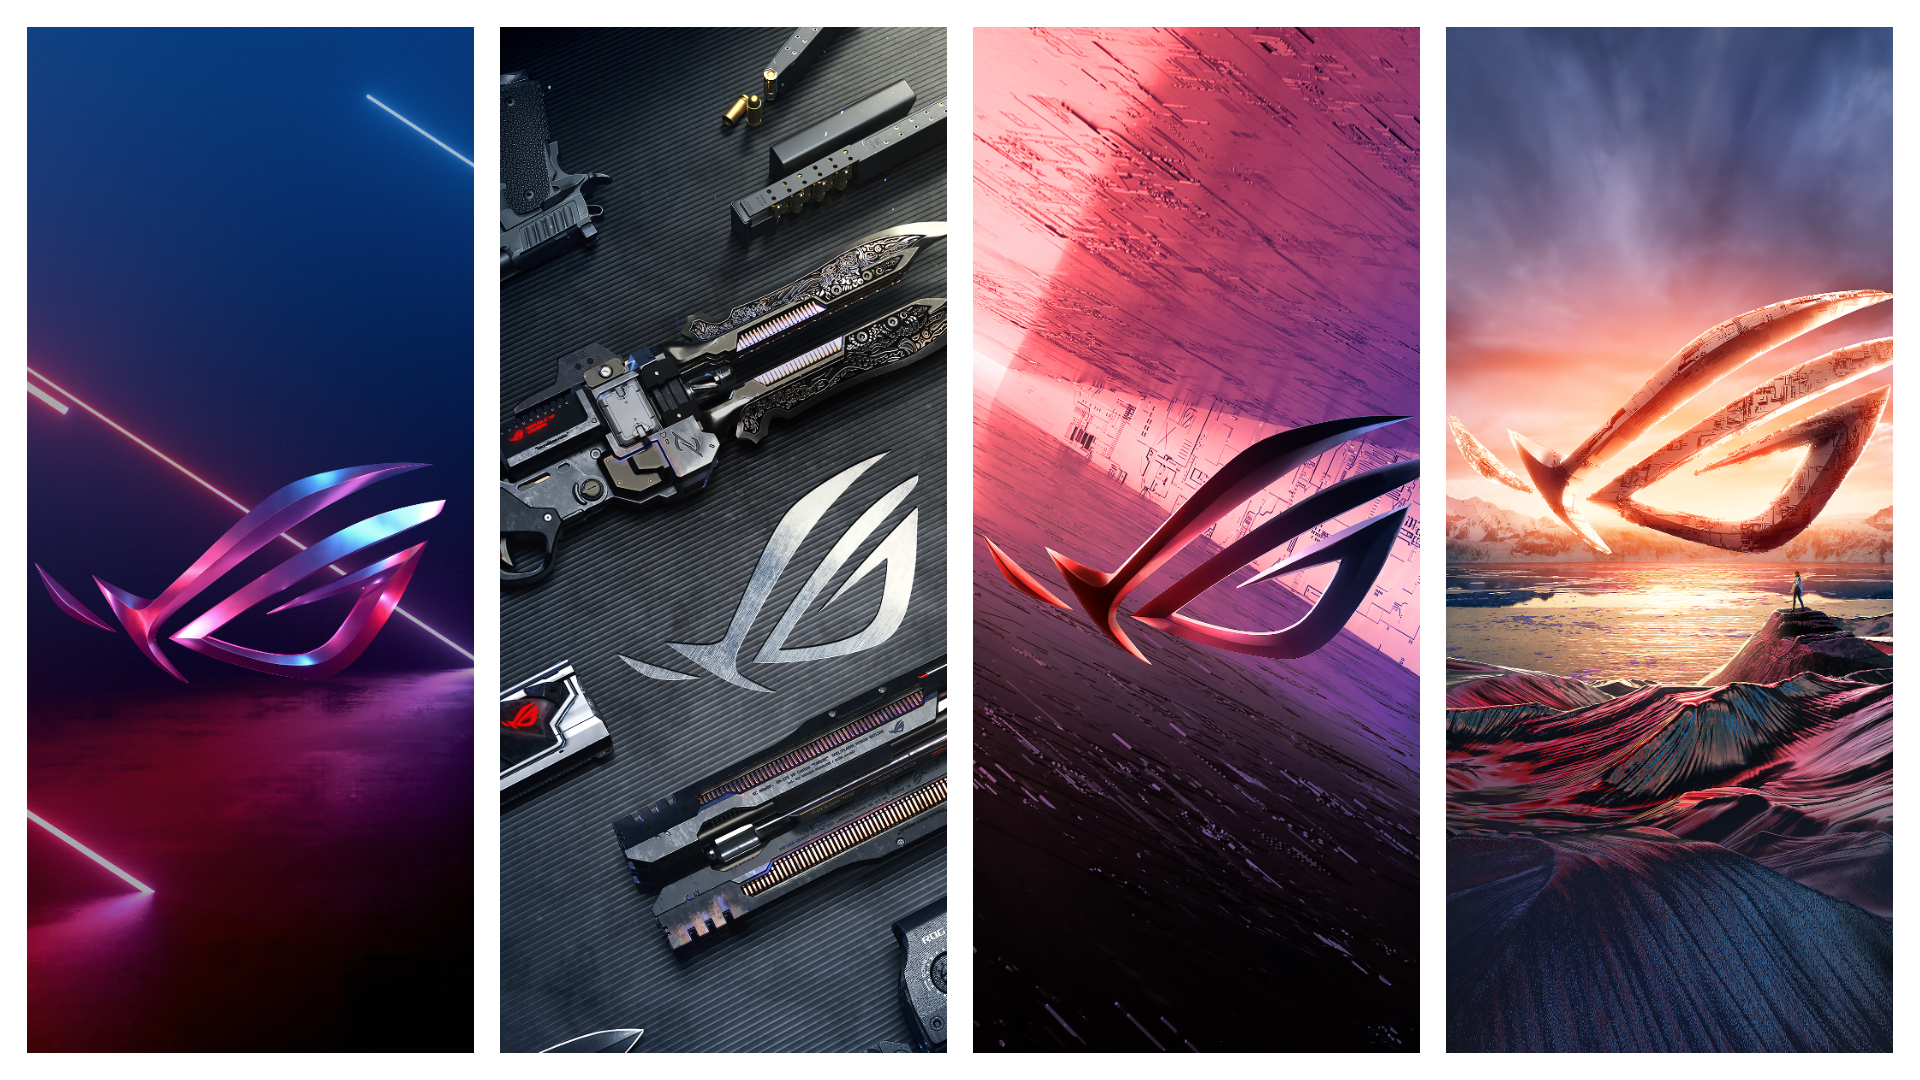 Download ASUS ROG Phone 5 Stock, Live Wallpapers [Get 27 Walls in 2KQ]